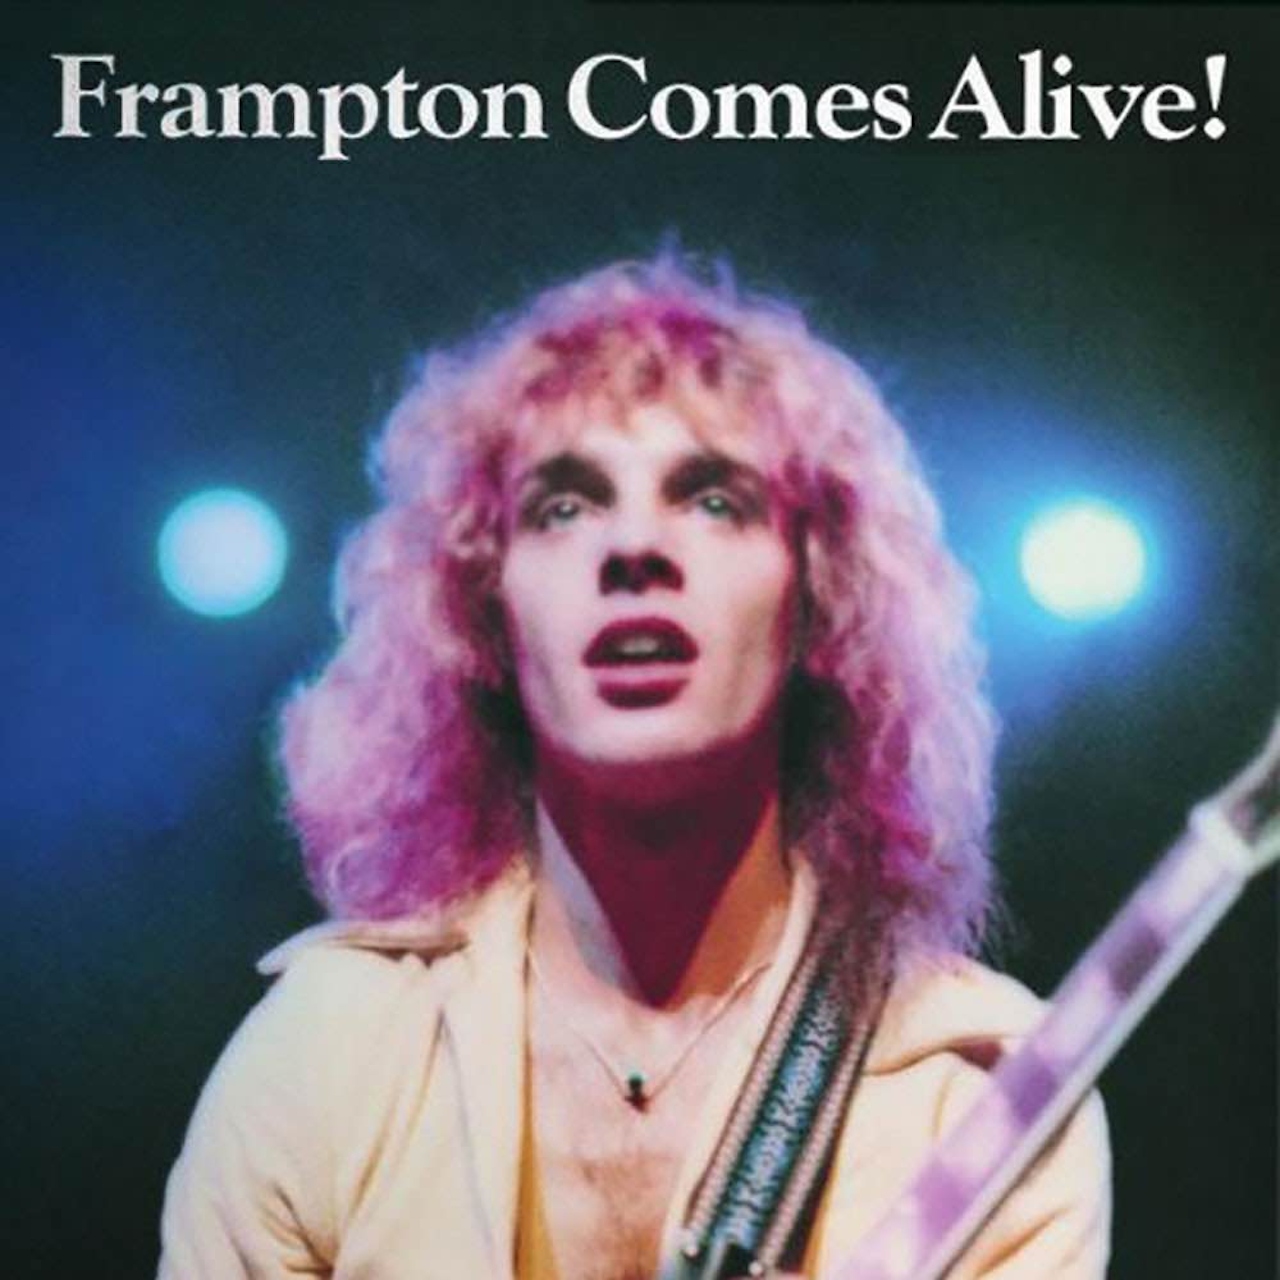 Peter Frampton’s ‘Frampton Comes Alive!’ Now Available In Dolby Atmos